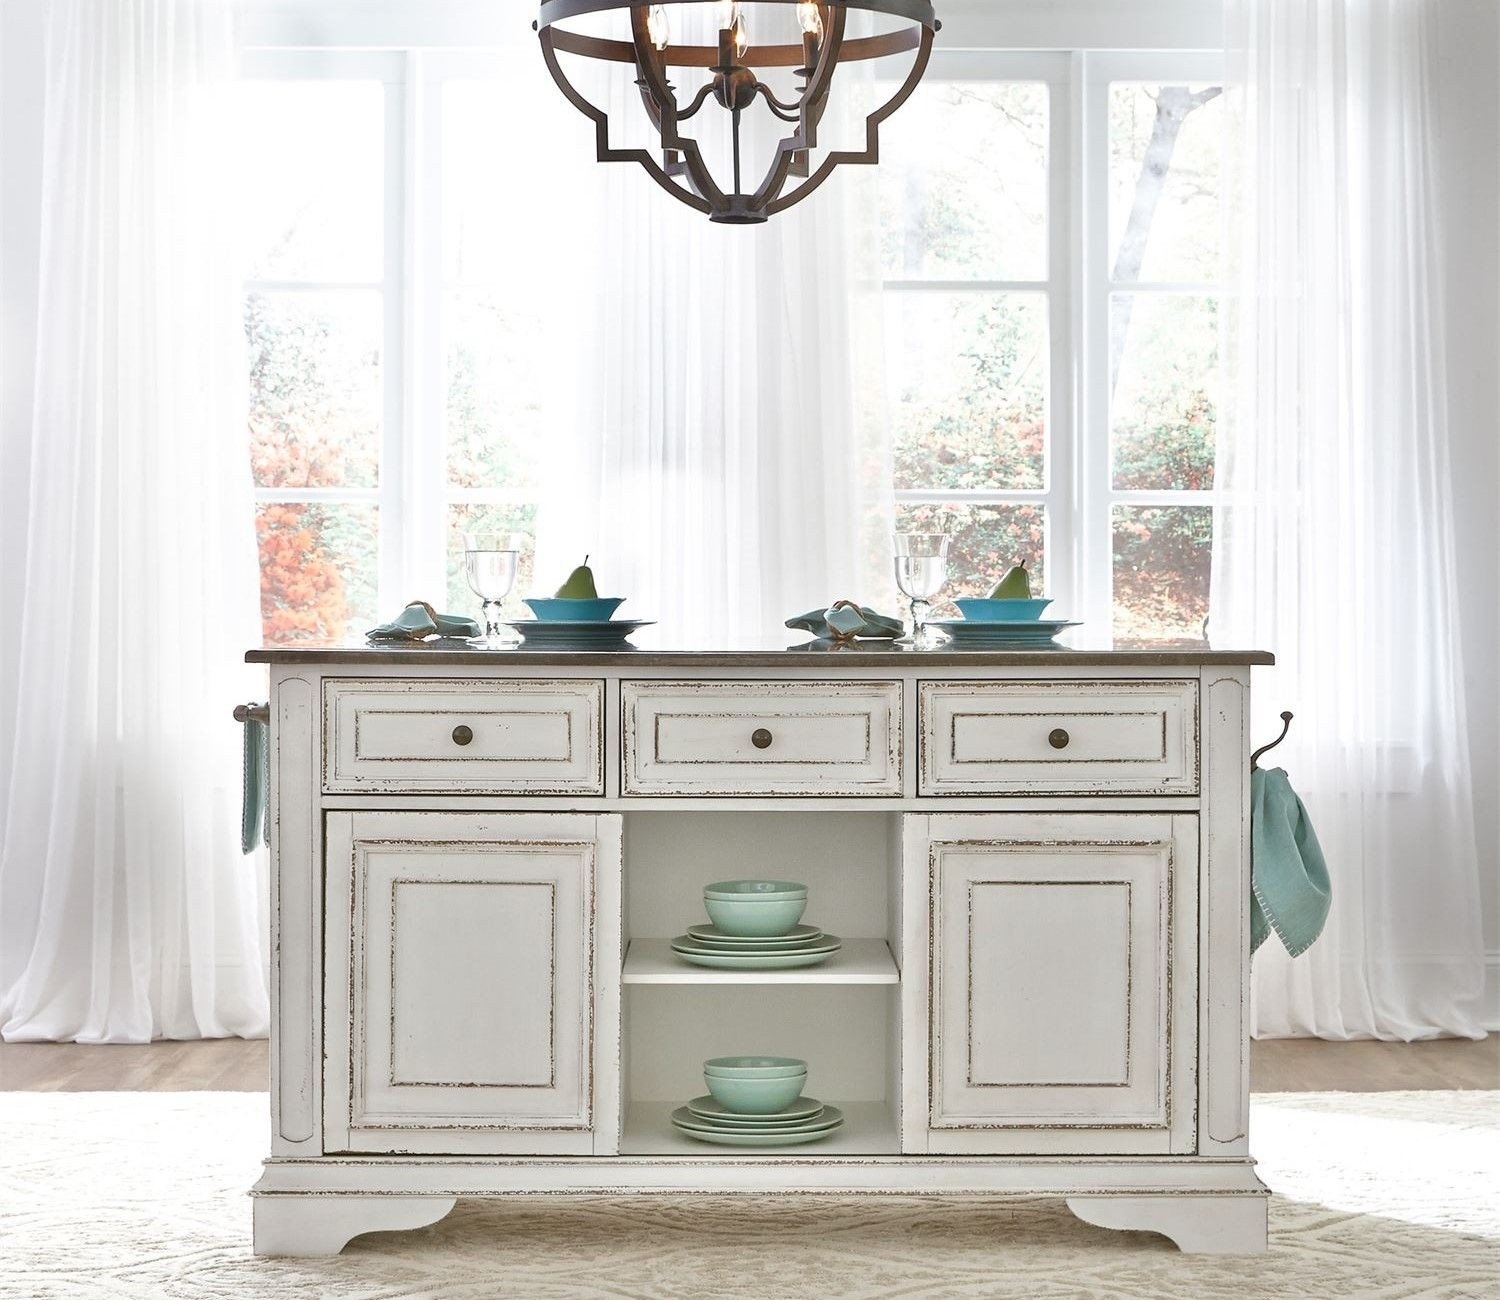 Magnolia traditional kitchen island with granite top in 2